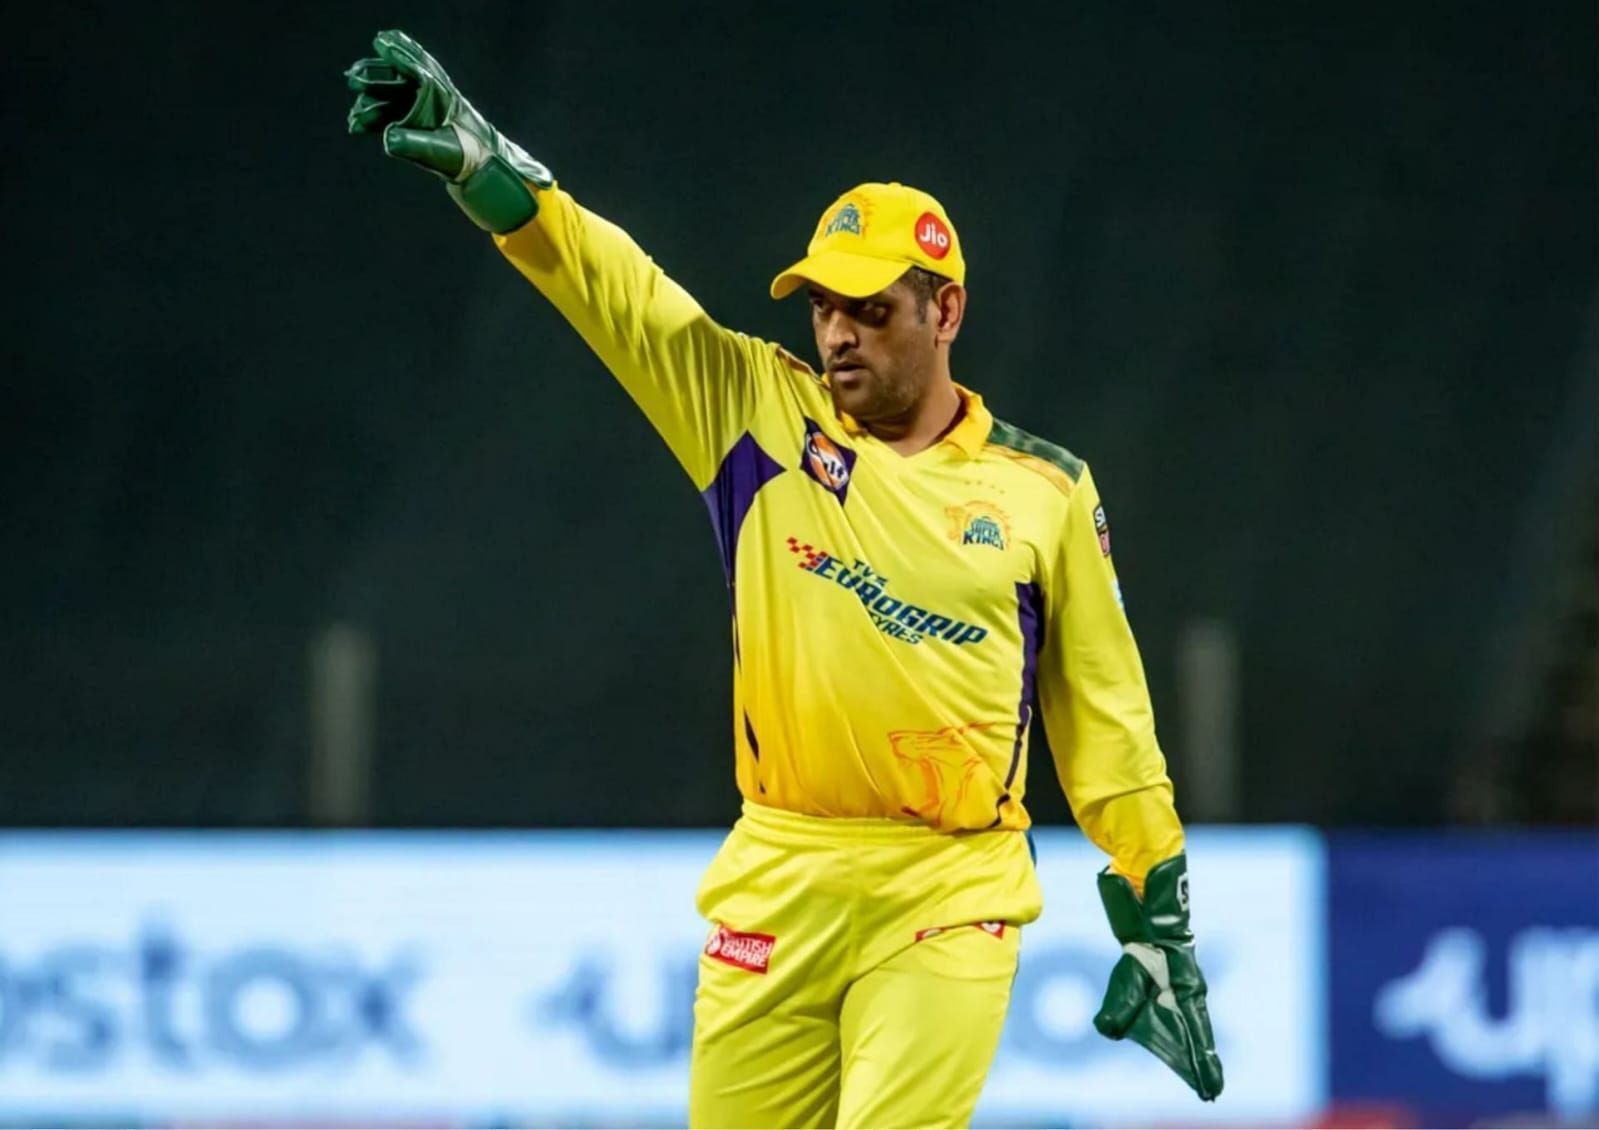 M.S. Dhoni is by far one of the greatest wicket-keepers, finishers in the history of the IPL.